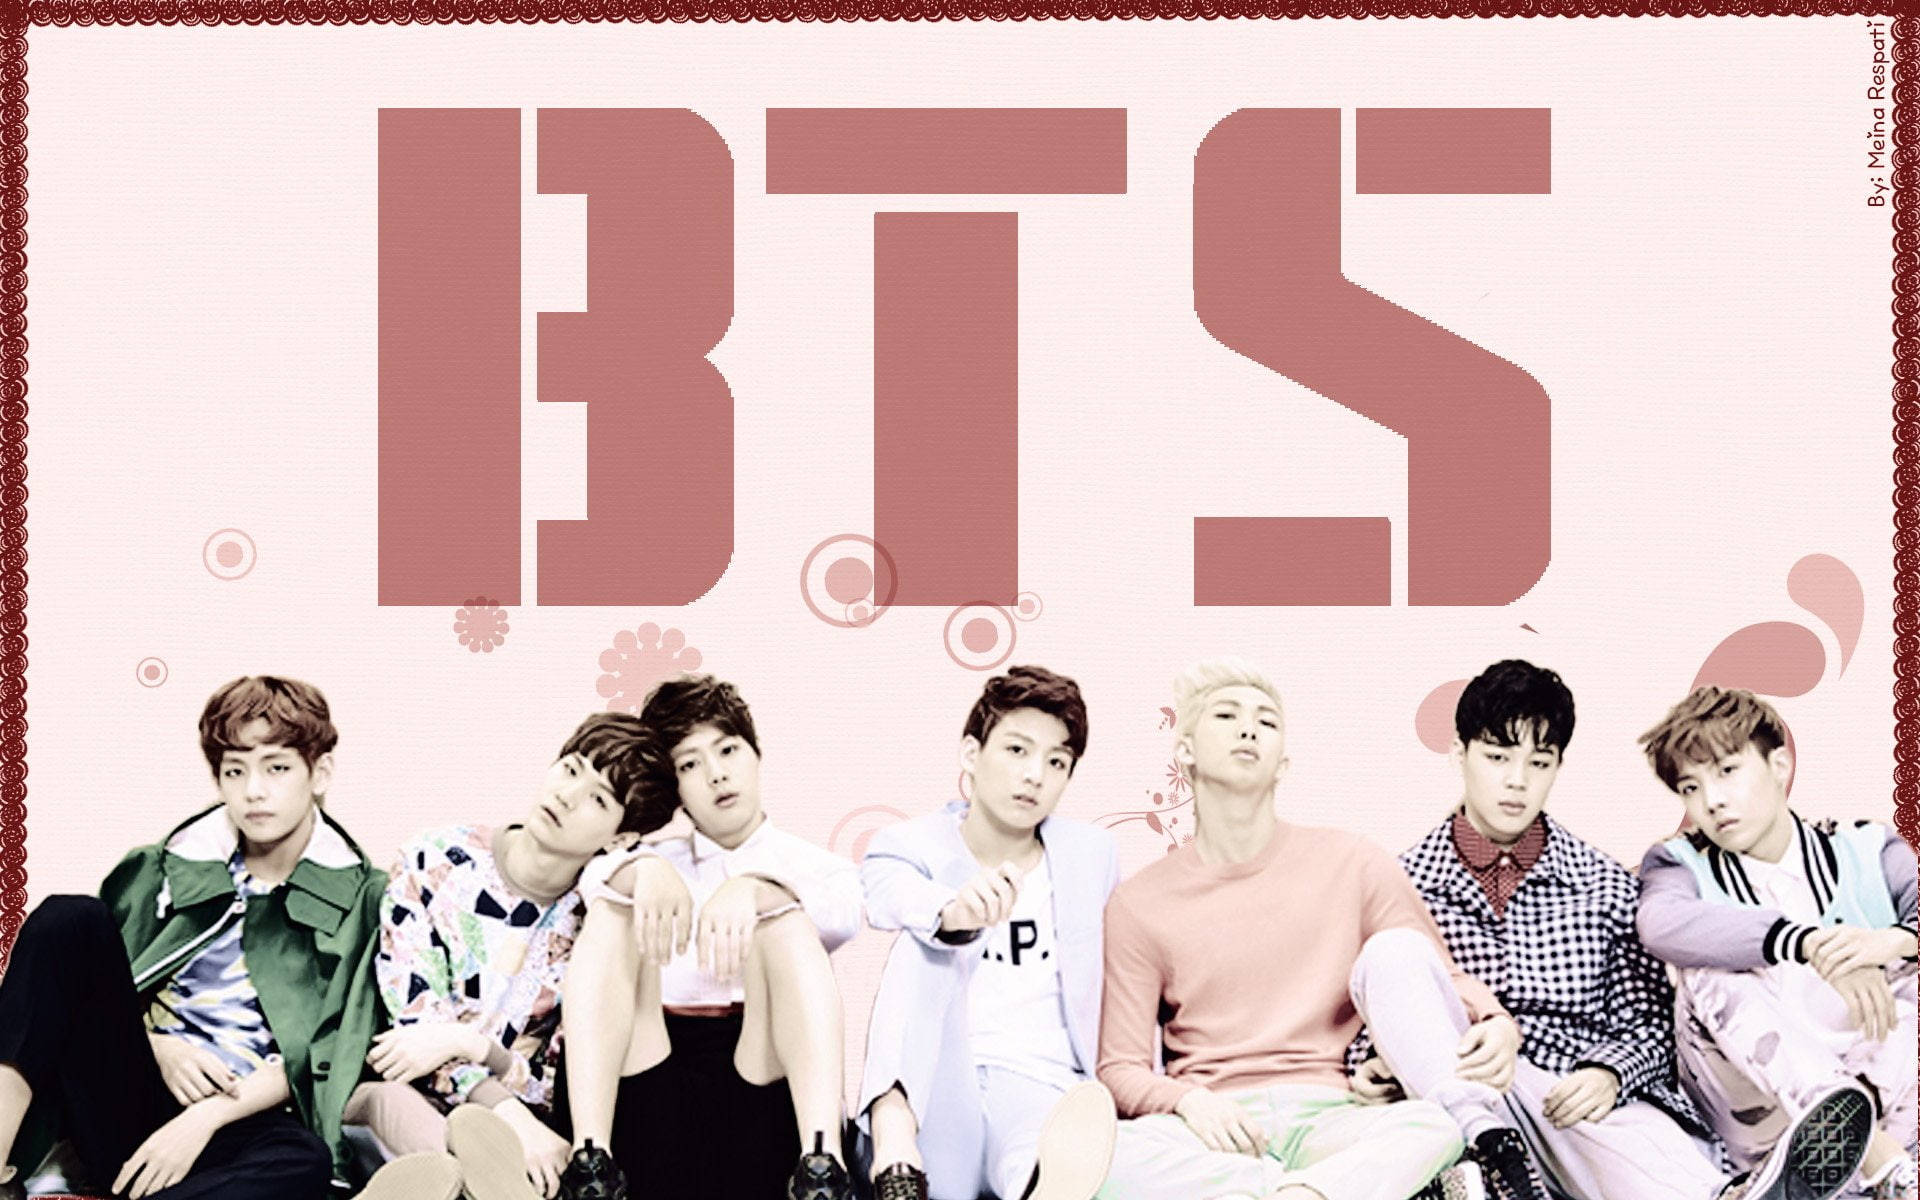 Bts Group Photo In Pink Background